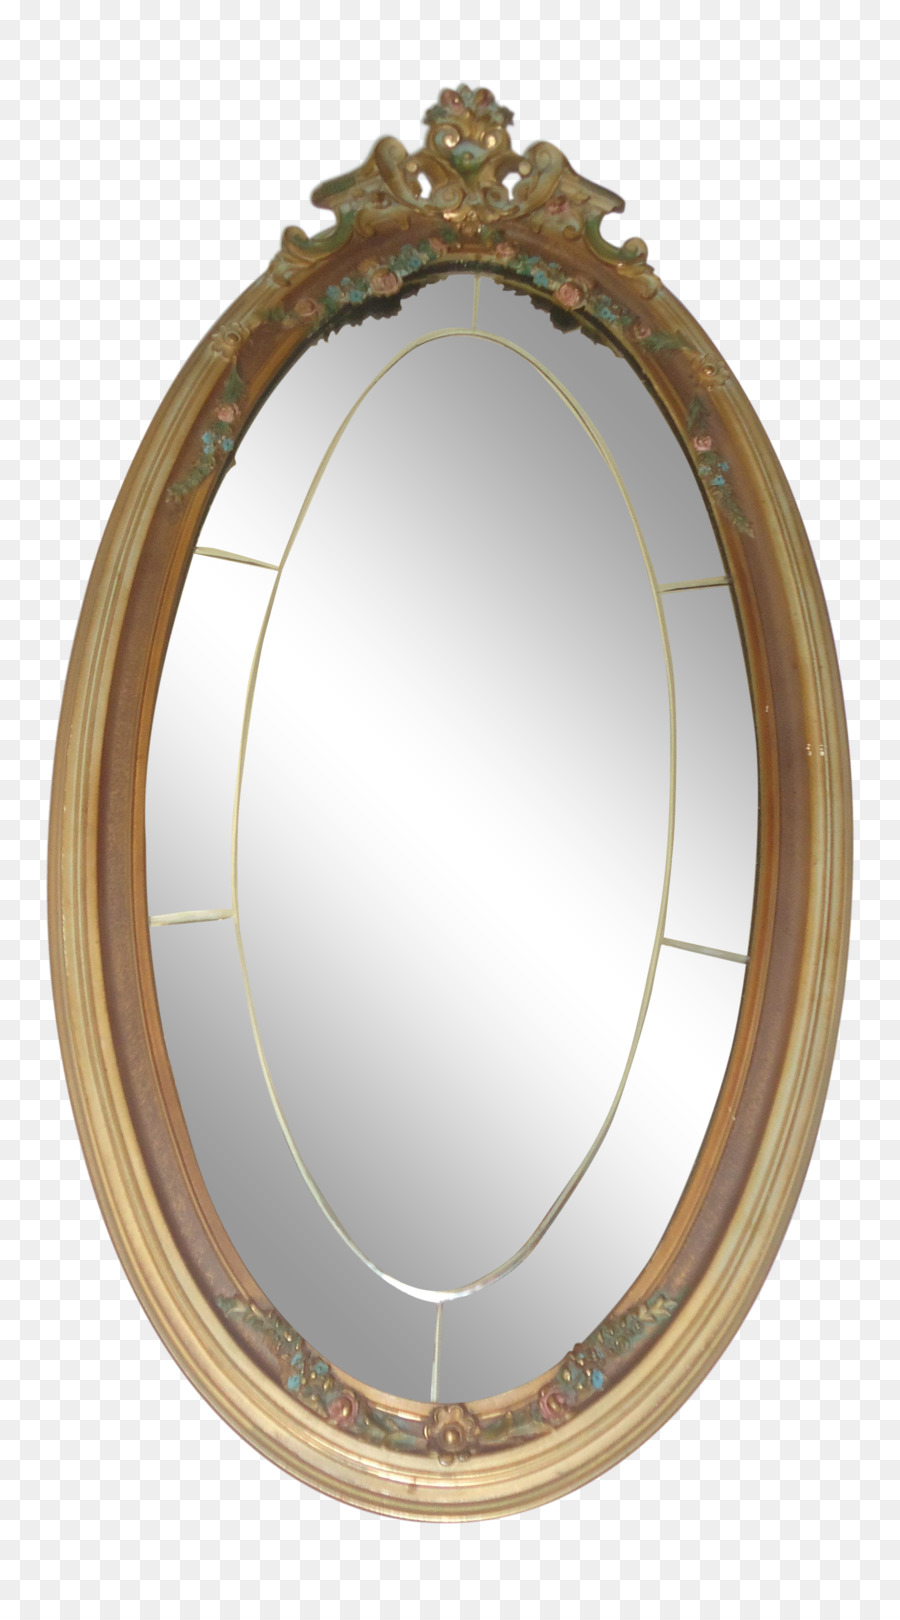 Oval Mirror Picture Frames Framed Wall Mirror Perfect mirror - standing mirror png download - 2389*4261 - Free Transparent Mirror png Download.